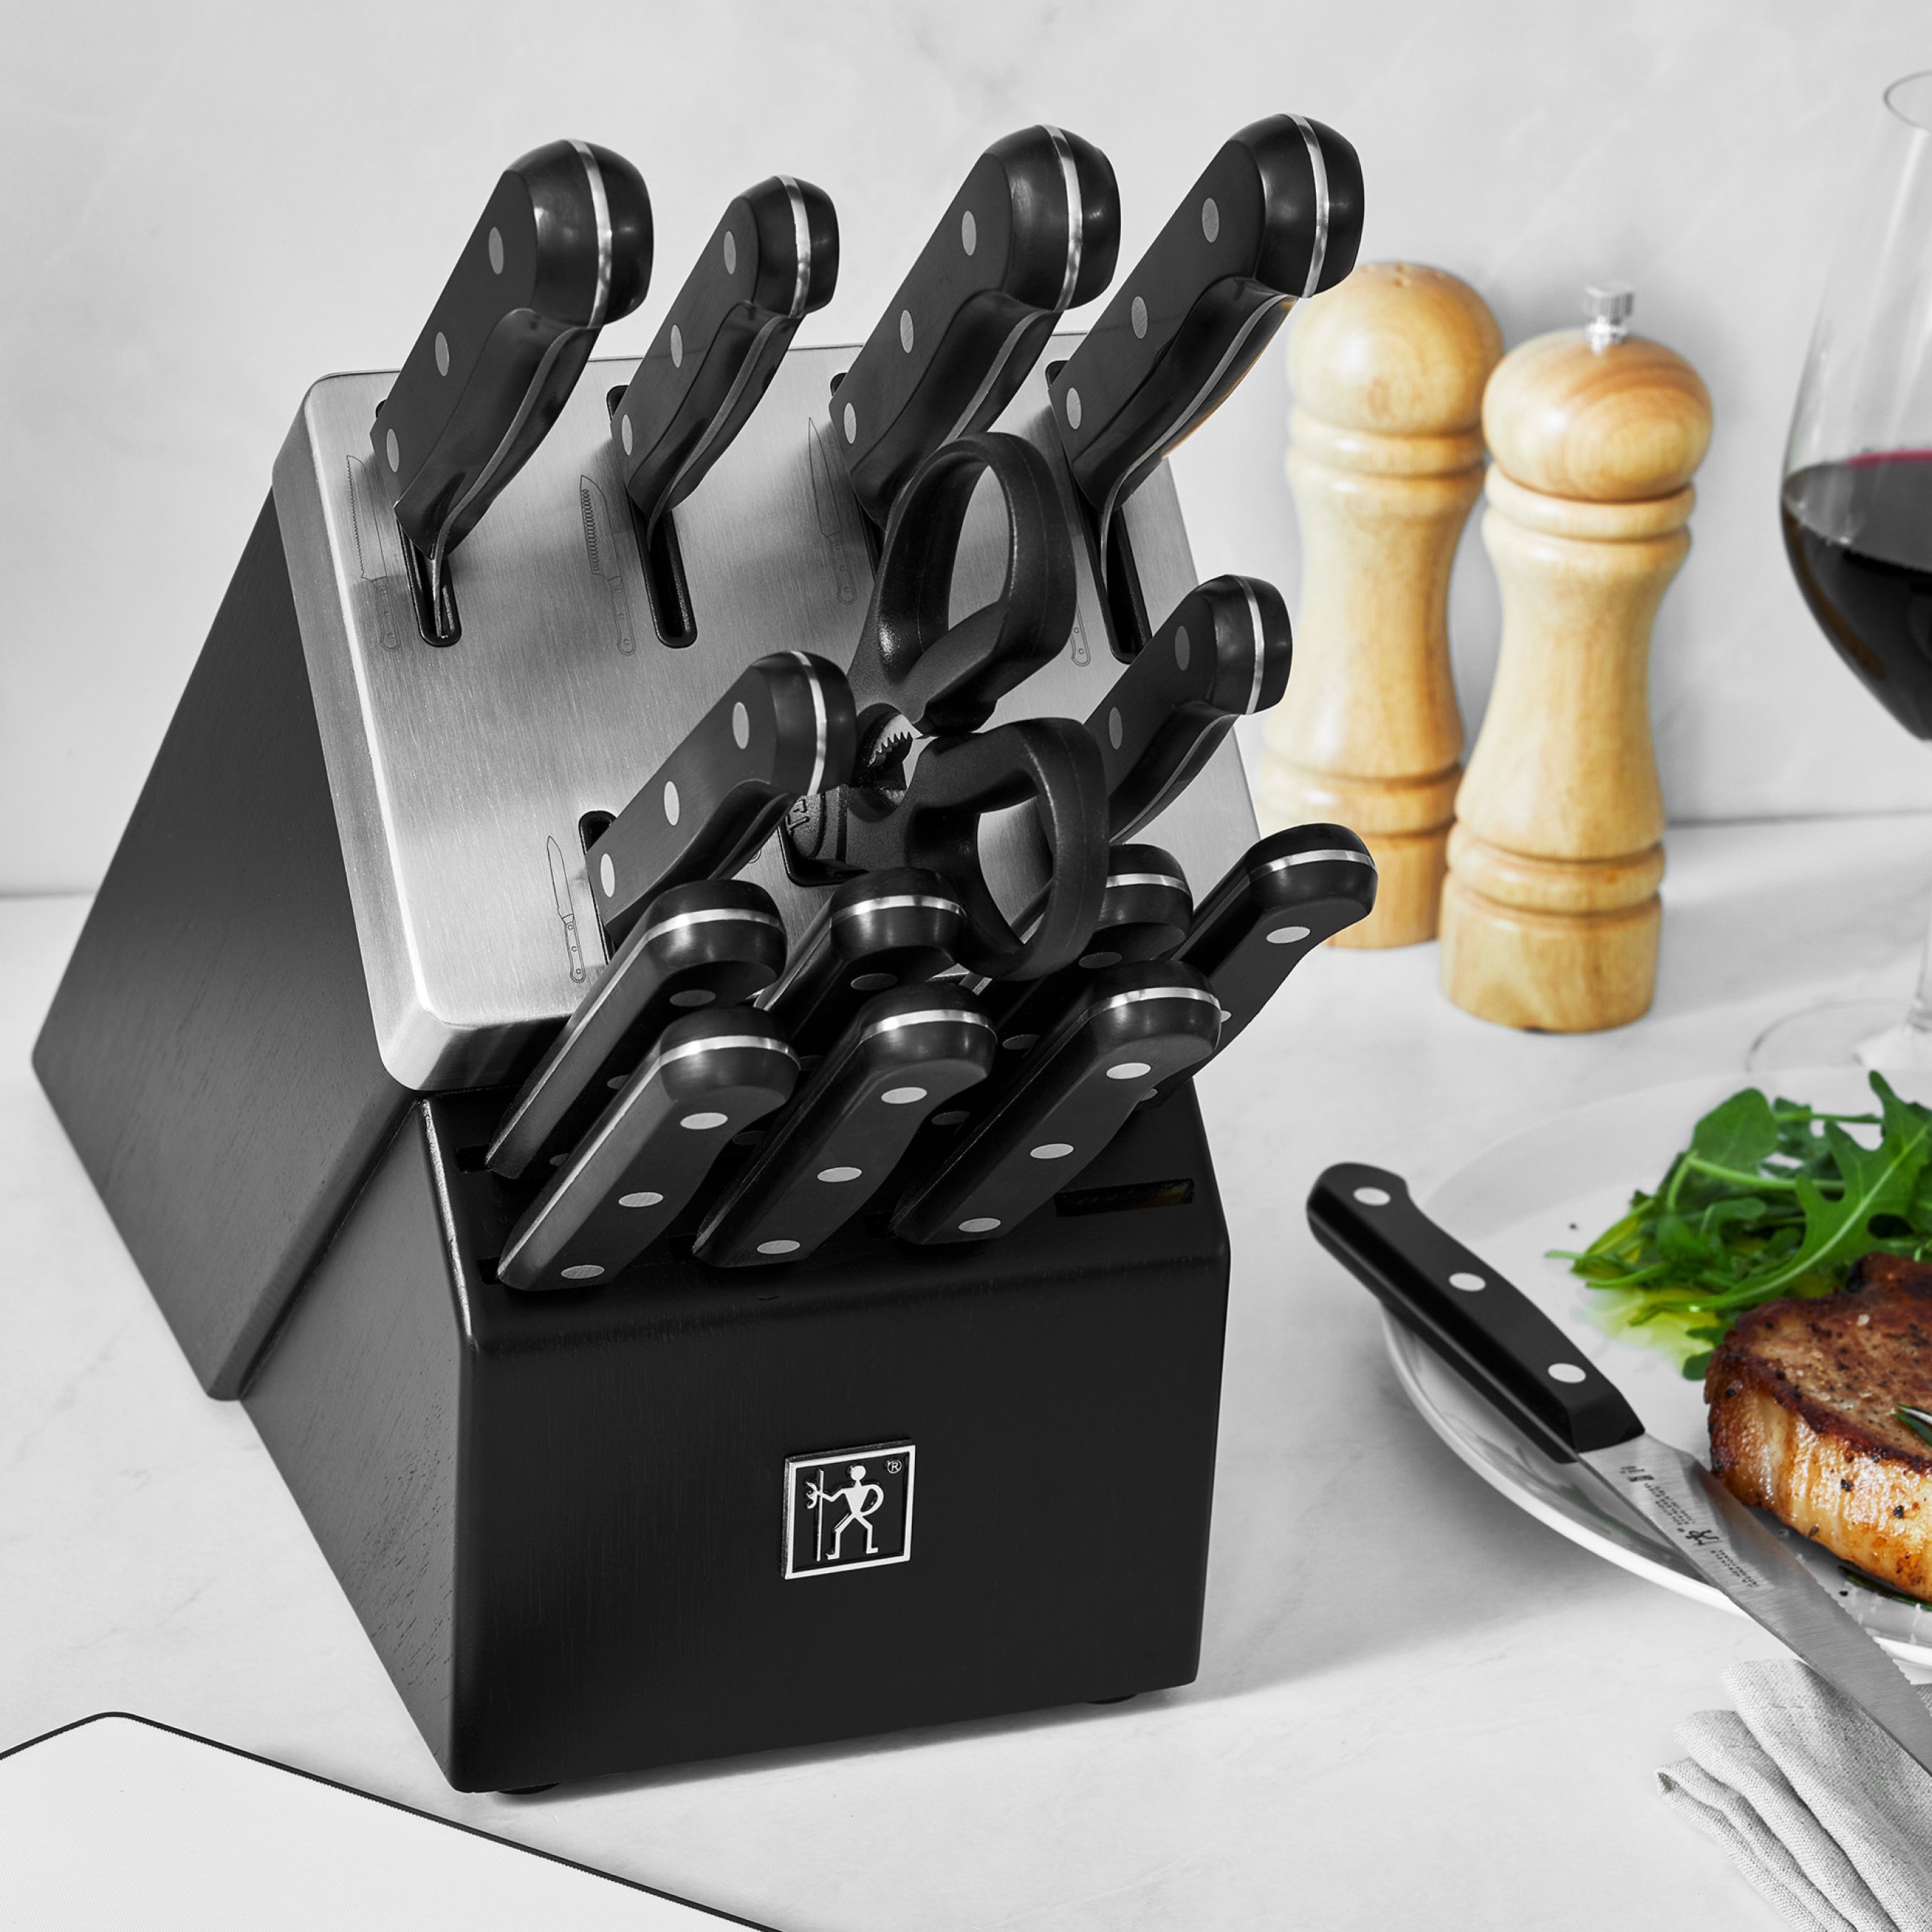 https://www.zwilling.com/on/demandware.static/-/Sites-zwilling-us-Library/default/dwfbe5a531/images/product-content/masonry-content/henckels/cutlery/Solution_02.jpg